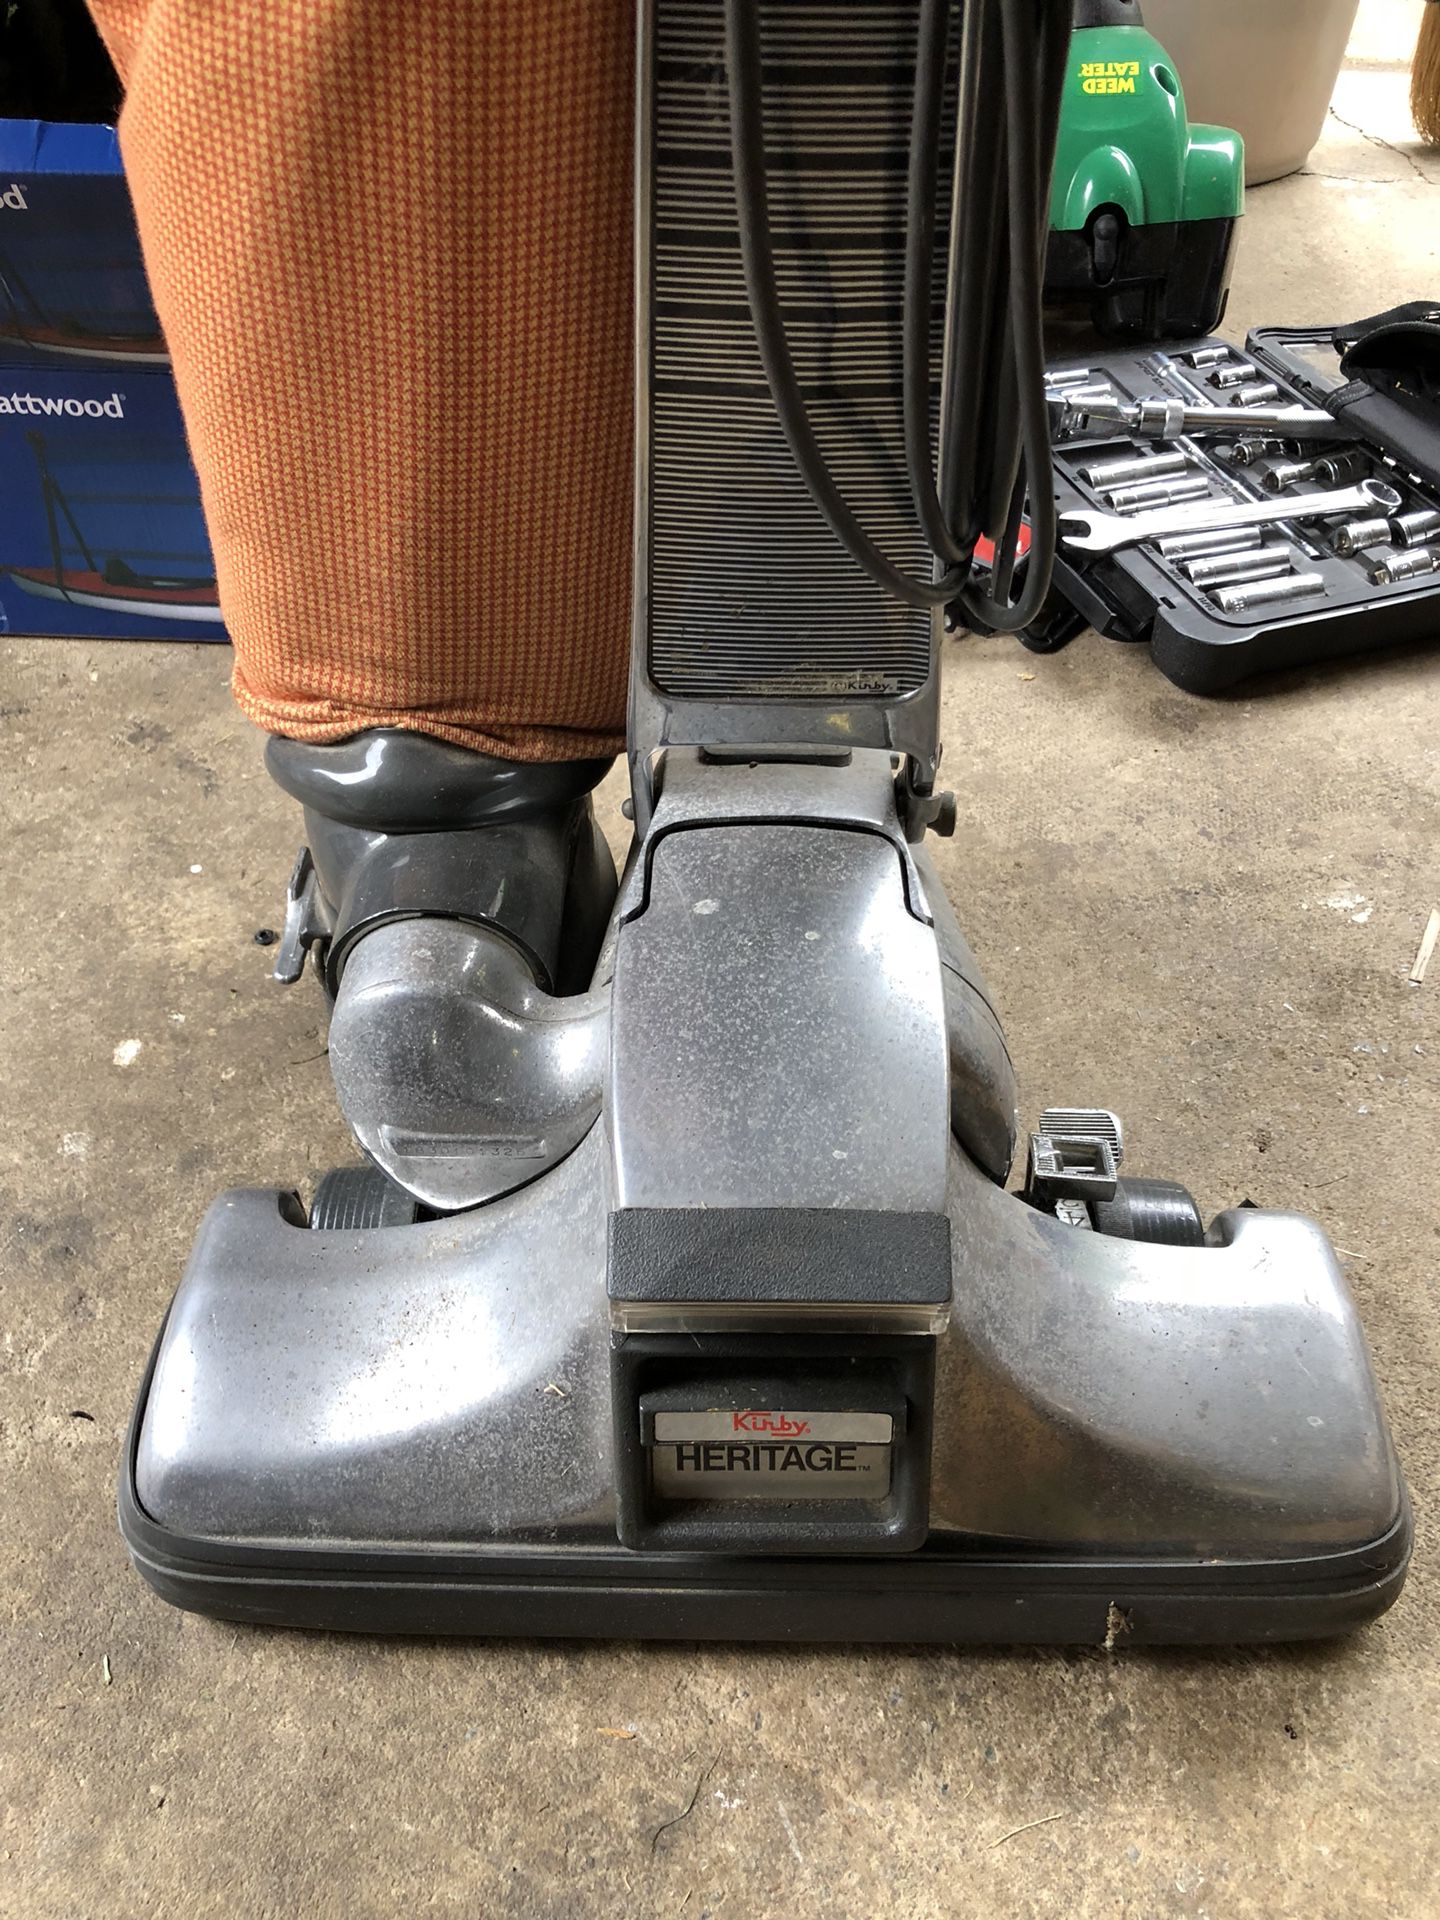 Kirby Heritage vacuum w/ hose attachments